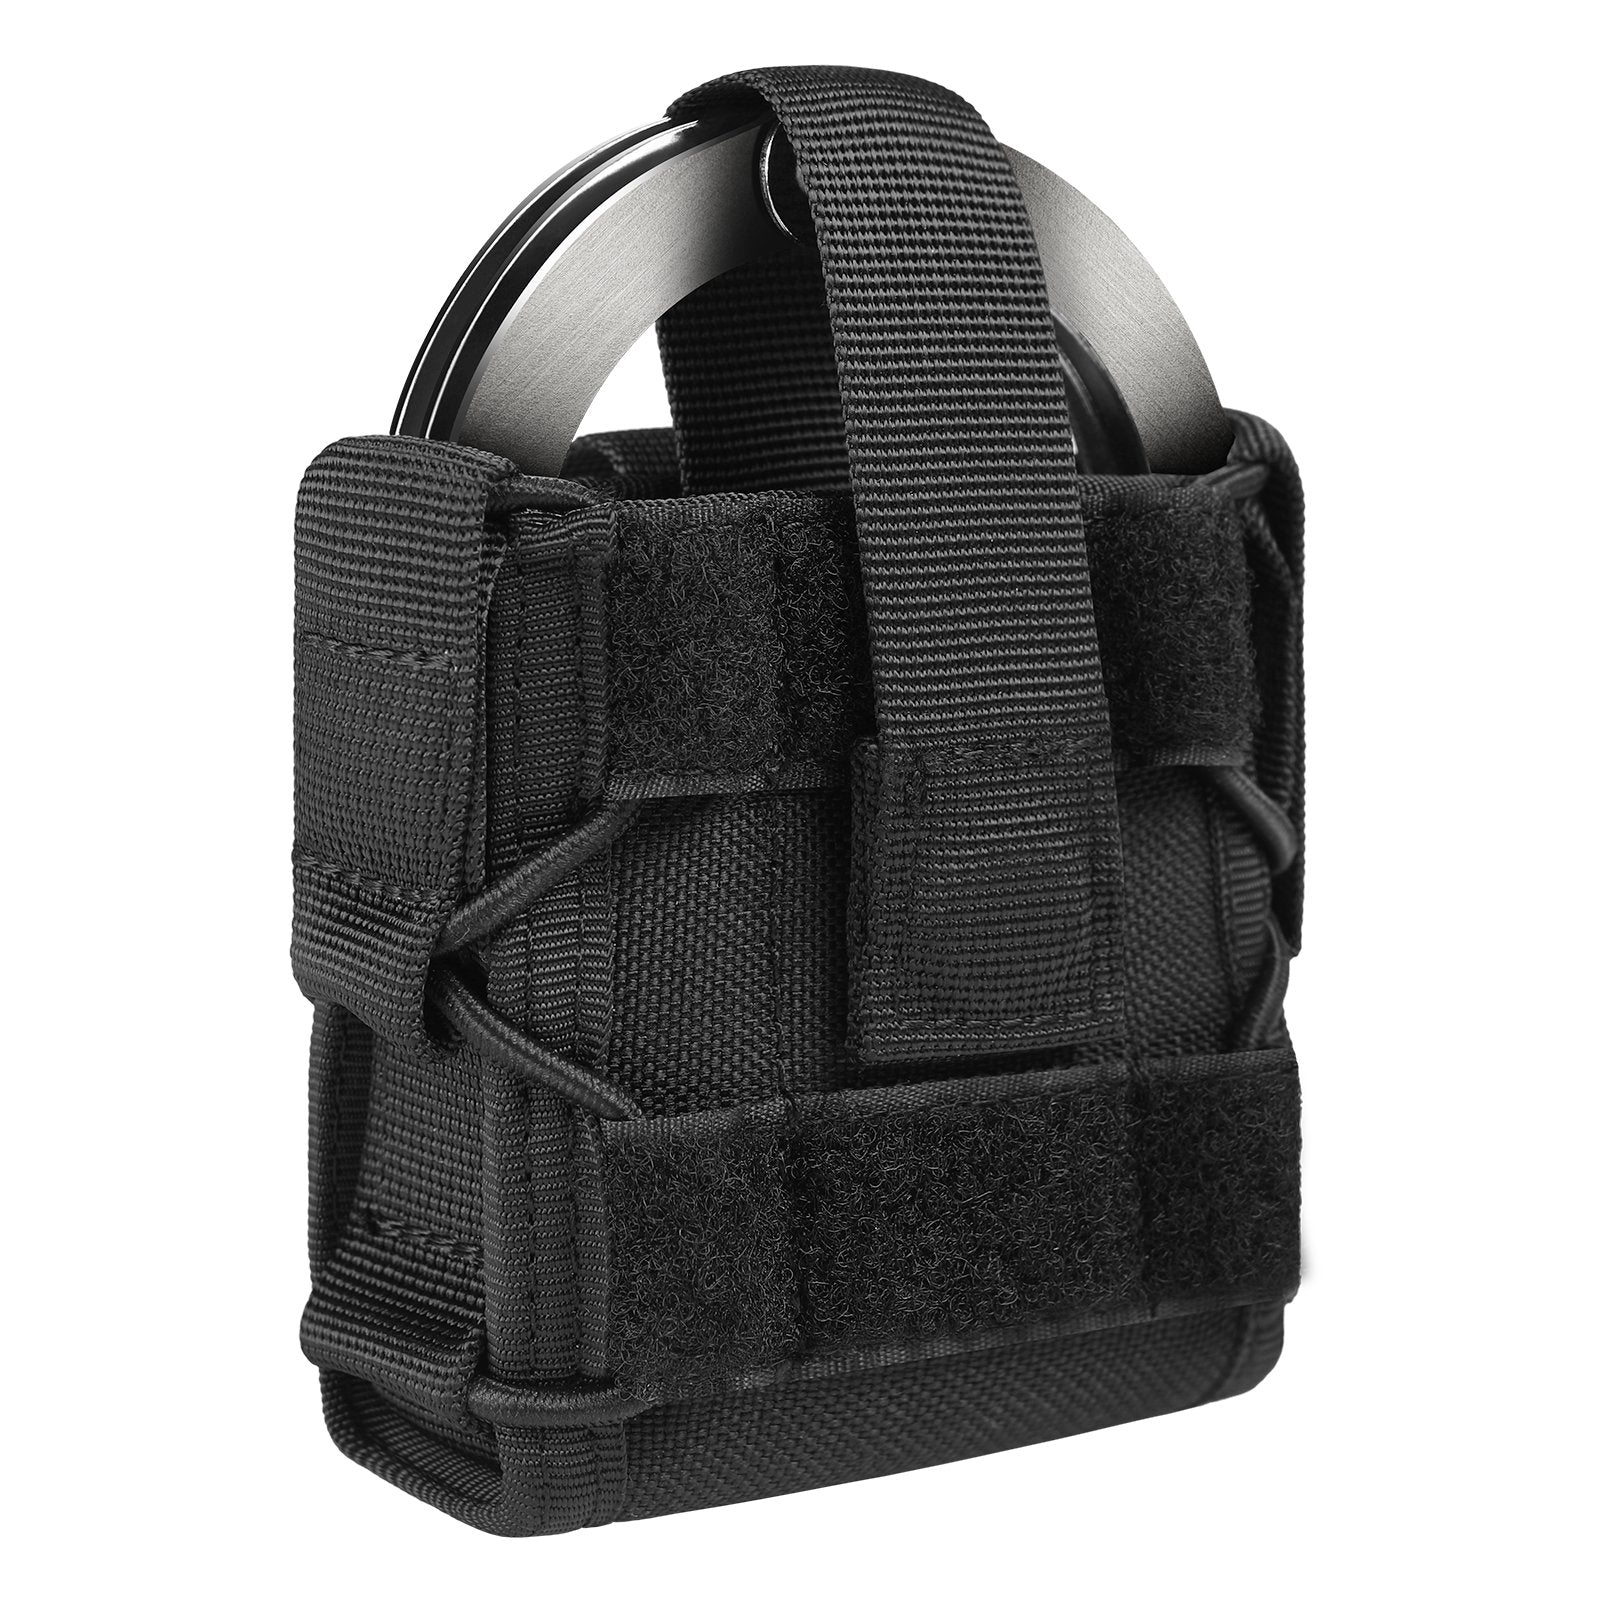 Polymer Molle Handcuff Holster - Open Law Enforcement Tactical Handcuff  Case for Hinged & Chain Handcuffs & Quick Release Hand Cuff Pouch for Duty